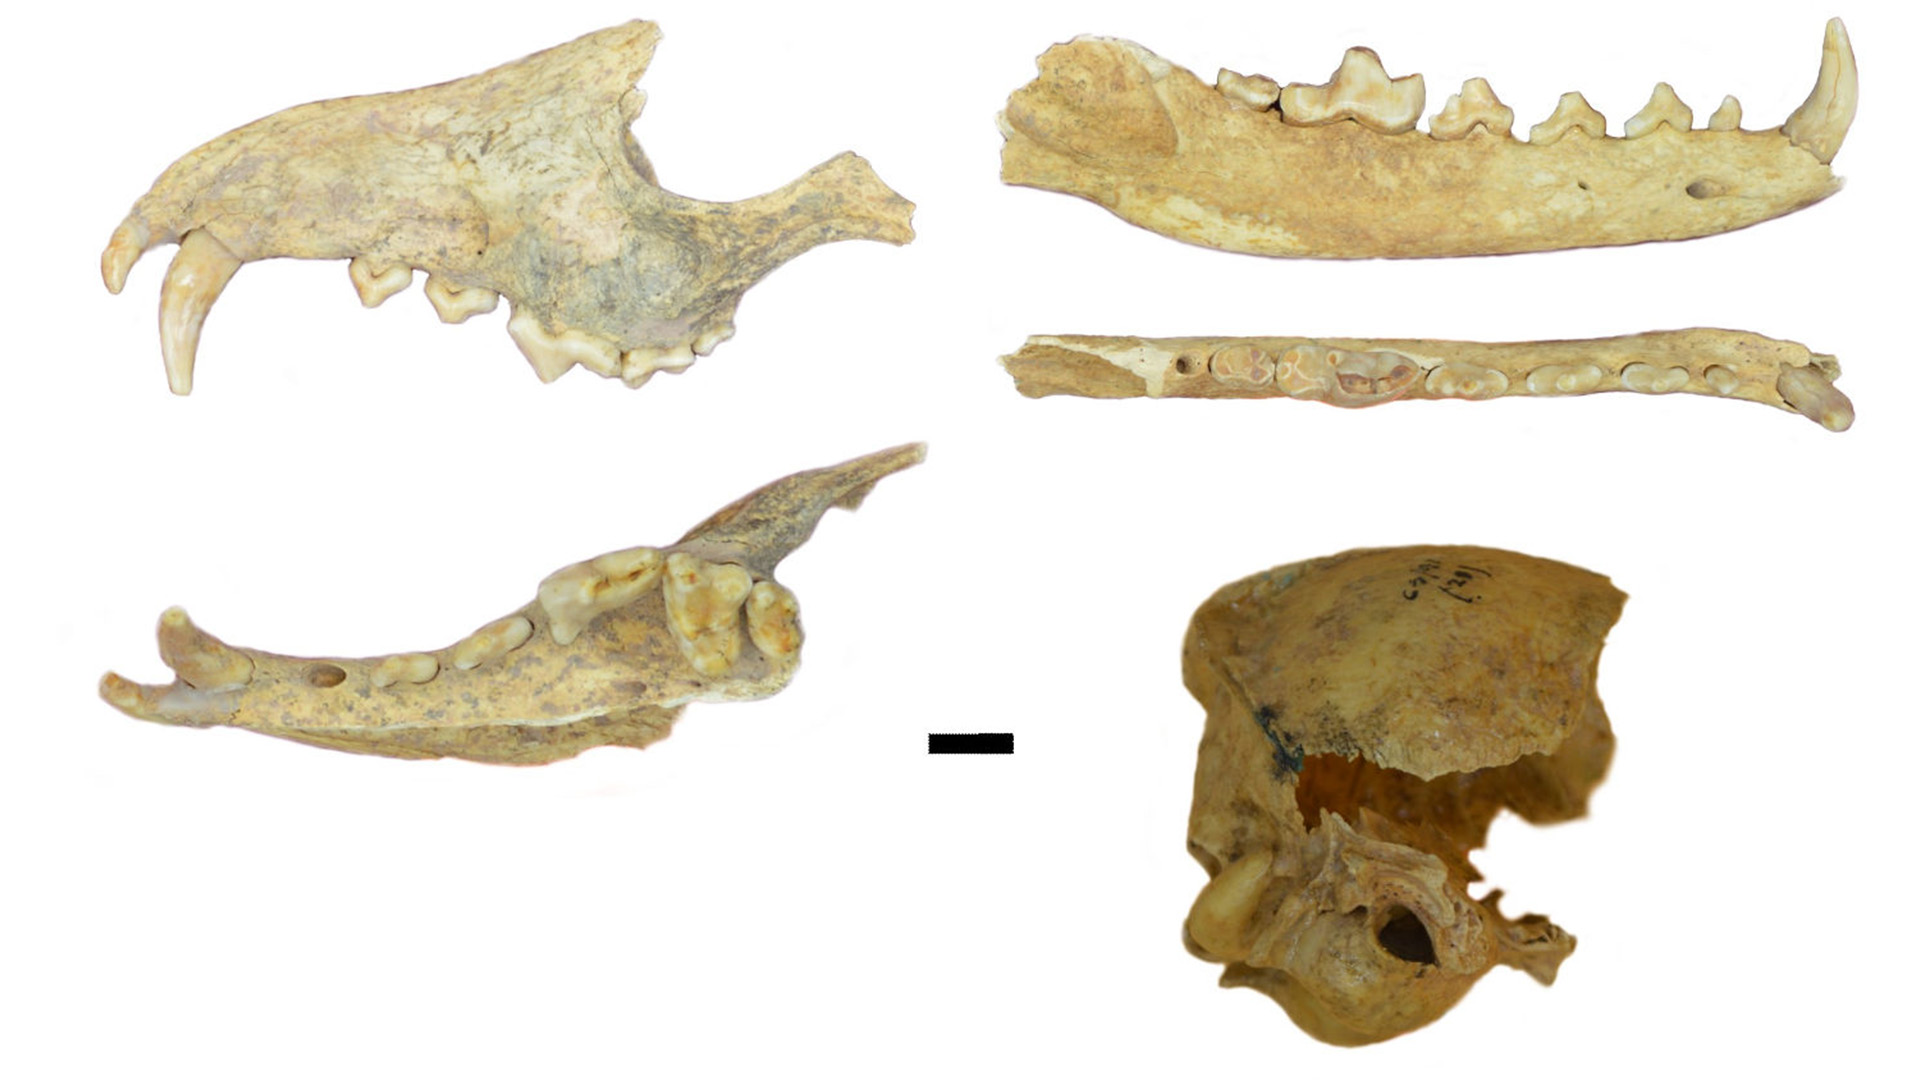 The researchers used precise measurements of the surviving bones and ancient DNA analysis to determine that they were from an individual of the fox species Dusicyon avus.